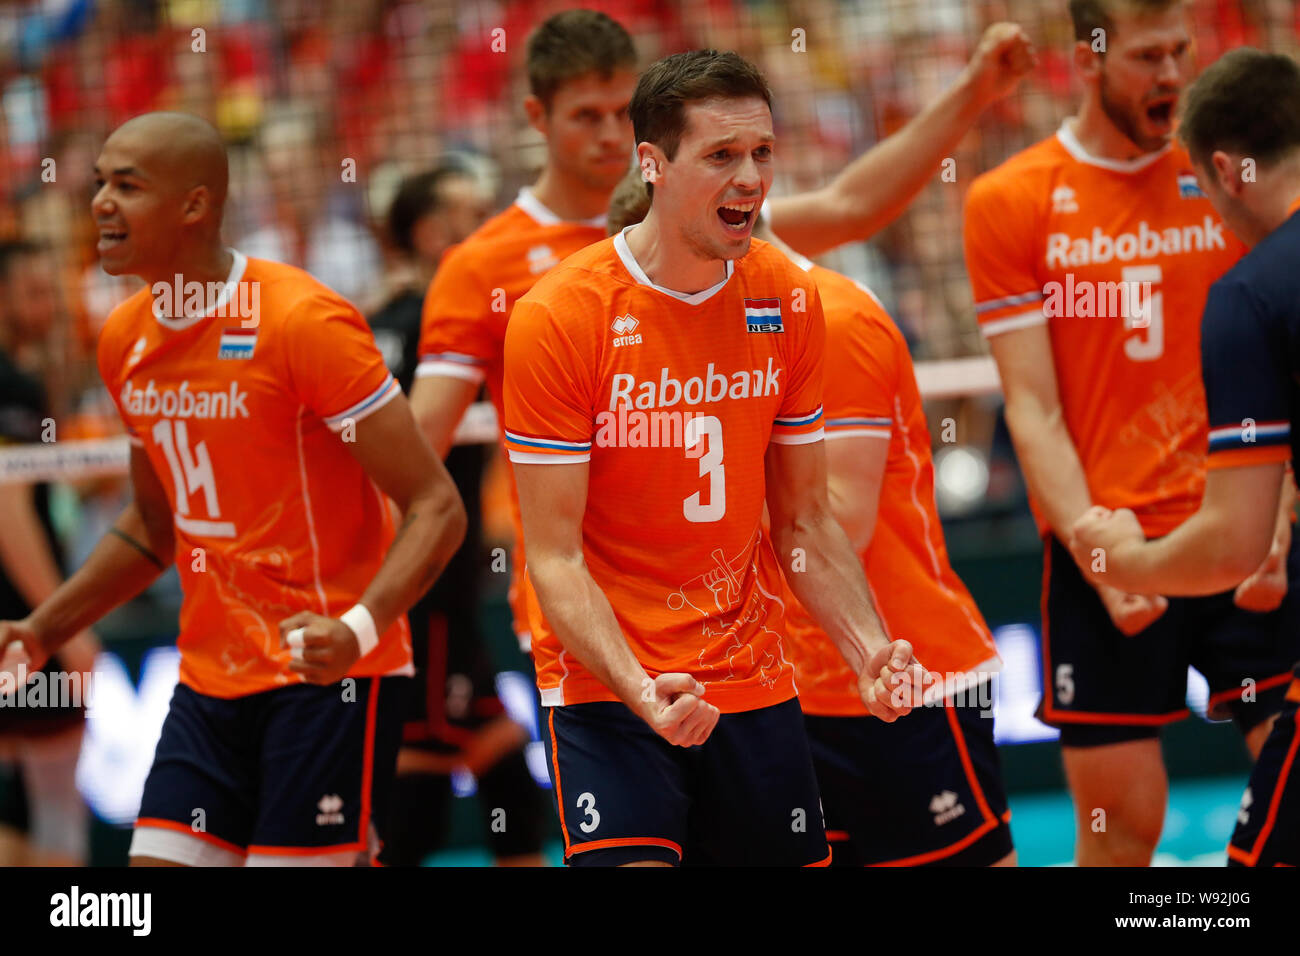 10 augustus 2019 Rotterdam, The Netherlands Tokyo 2020 Volleybal Olympic Qualification Tournament  10-08-2019: Volleybal: OKT Belgie v Nederland: Rotterdam Volleybal OKT Tokyo 2020 Men Rotterdam - Ahoy  L-R Nimir Abdel - Aziz (14) of The Netherlands, Maarten van Garderen (3) of The Netherlands Stock Photo